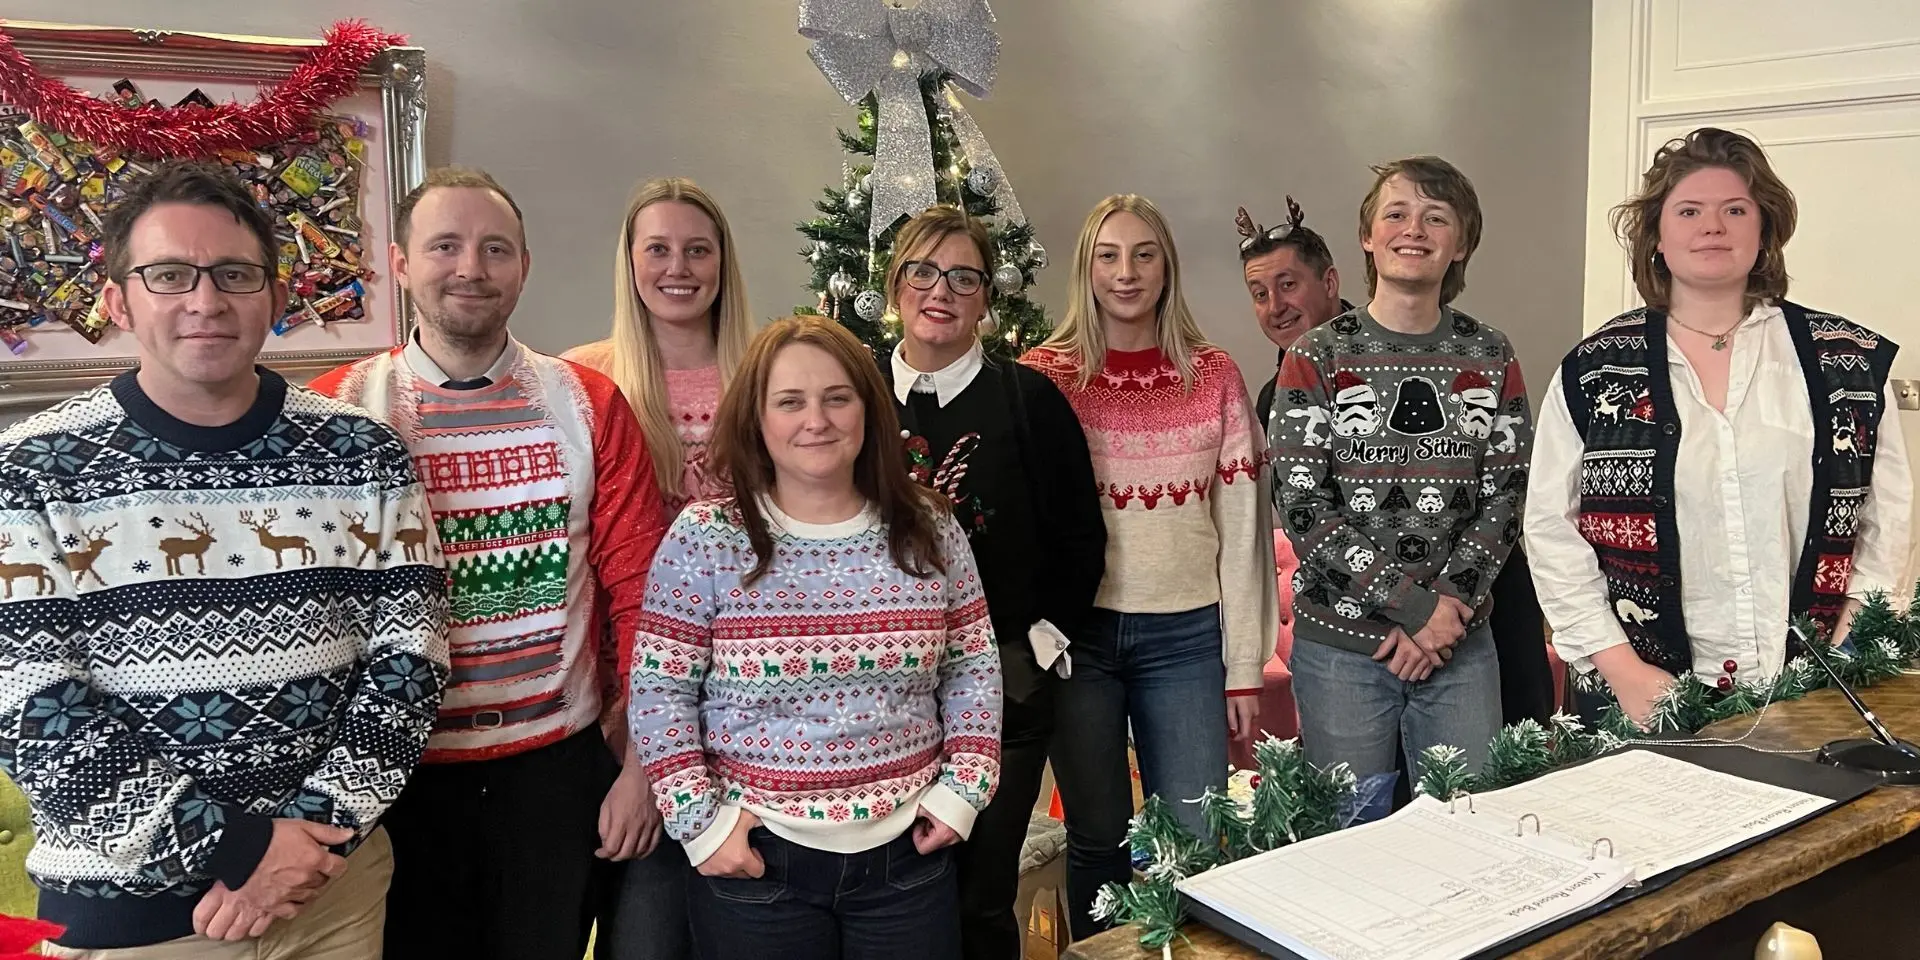 lexonik staff in Christmas jumpers, stood in front of a Christmas tree